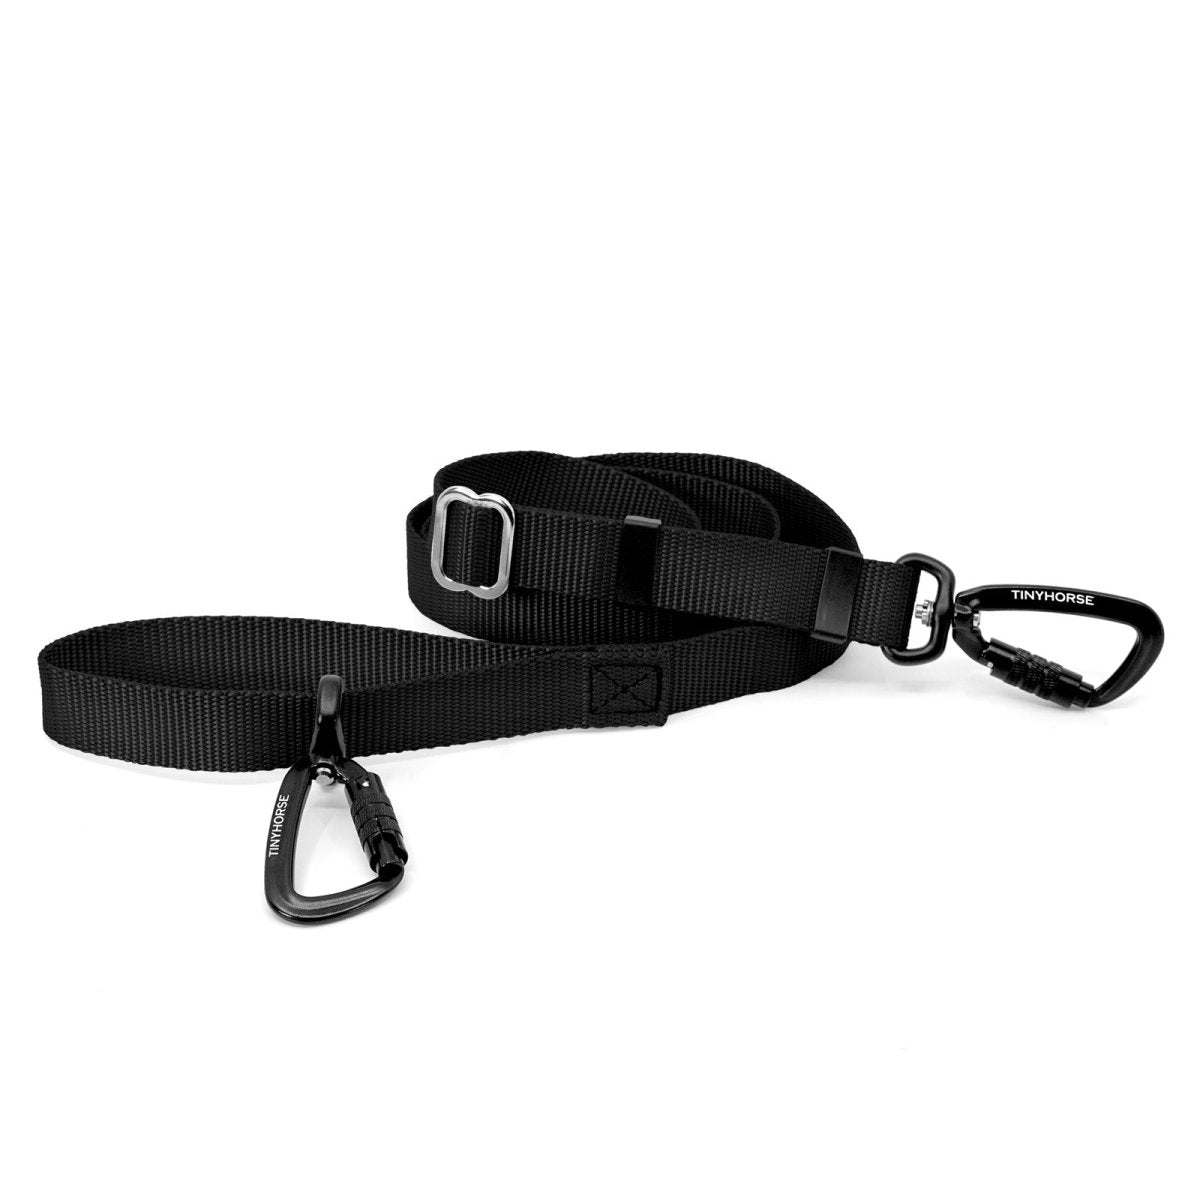 A black-coloured Lead-All Lite Extra with 2 auto-locking carabiners and nylon webbing